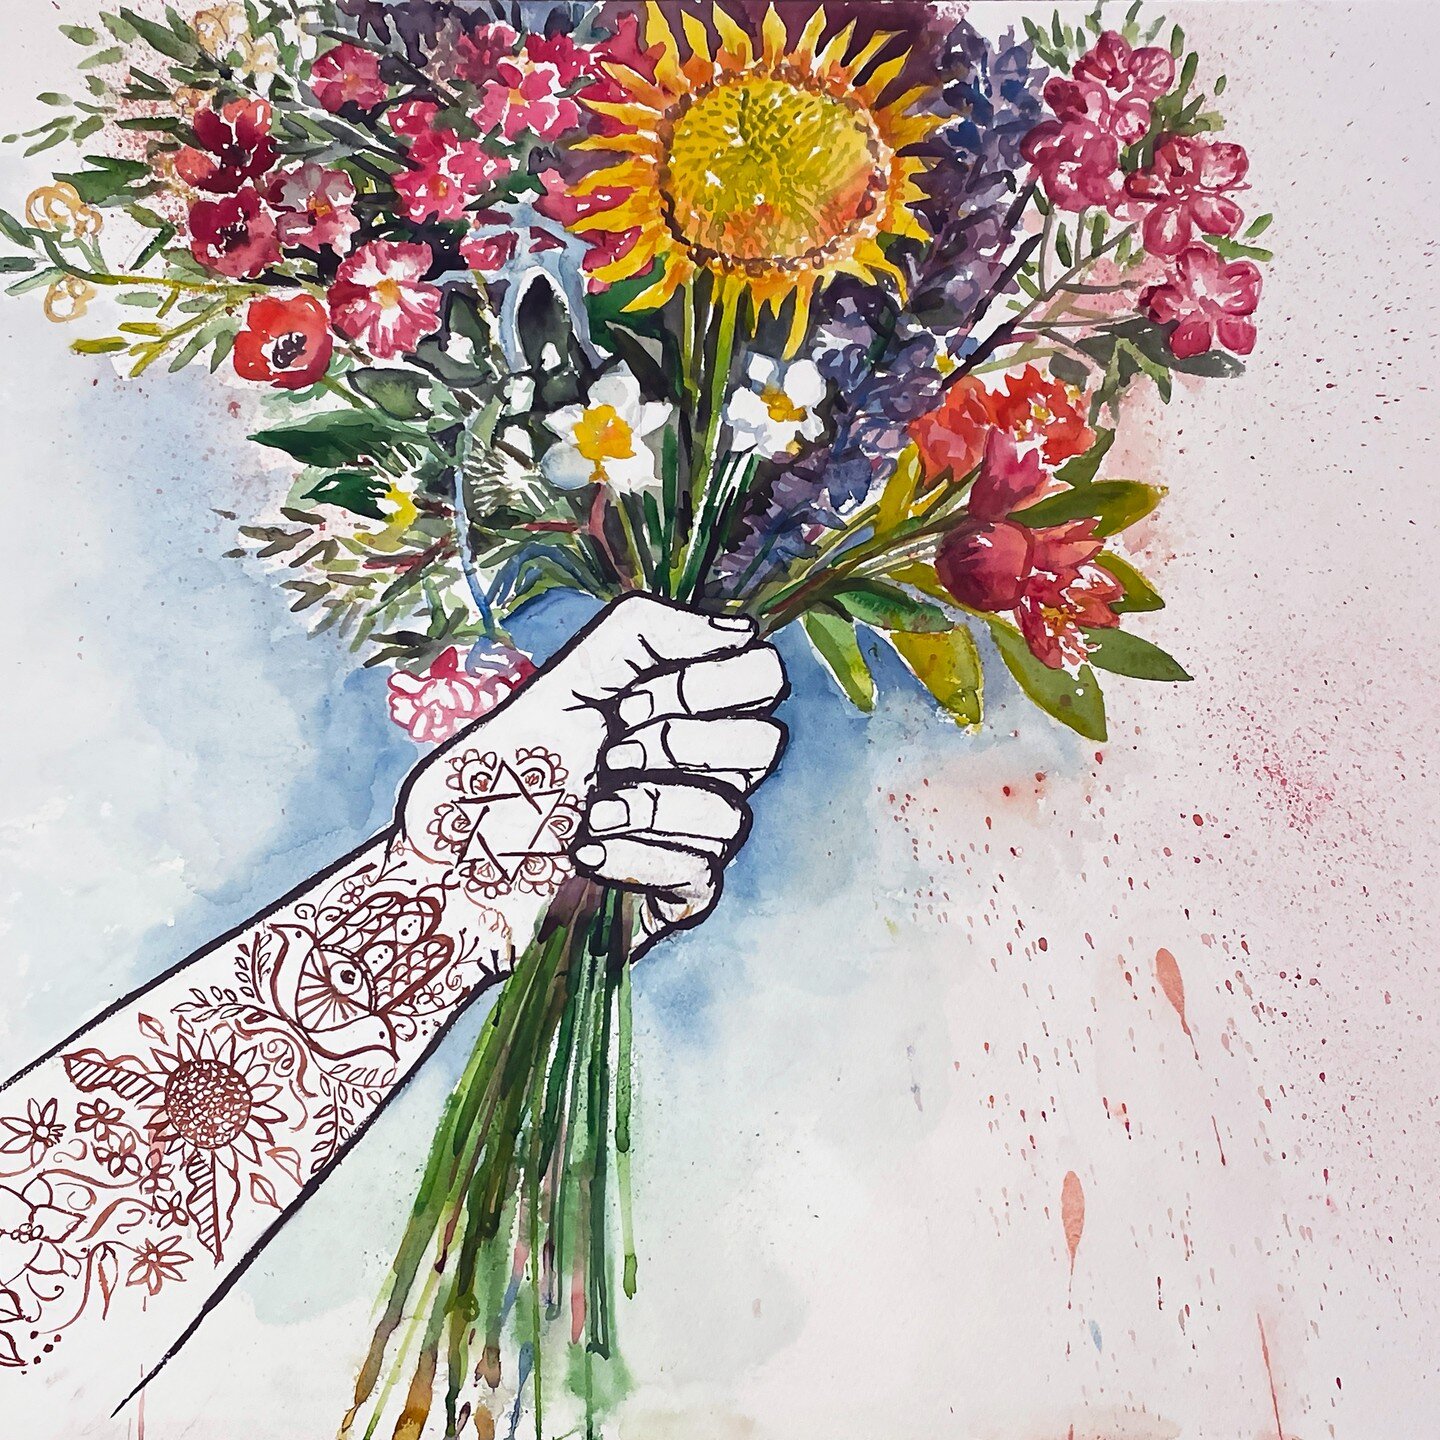 &quot;Guardians of Hope: A Bouquet of Blessings&quot; Watercolor 18&quot; x 24&quot;

In the wake of the Israeli-Hamas war, where lives hang in the balance and suffering abounds, I created this painting as an artistic offering of protection and solac